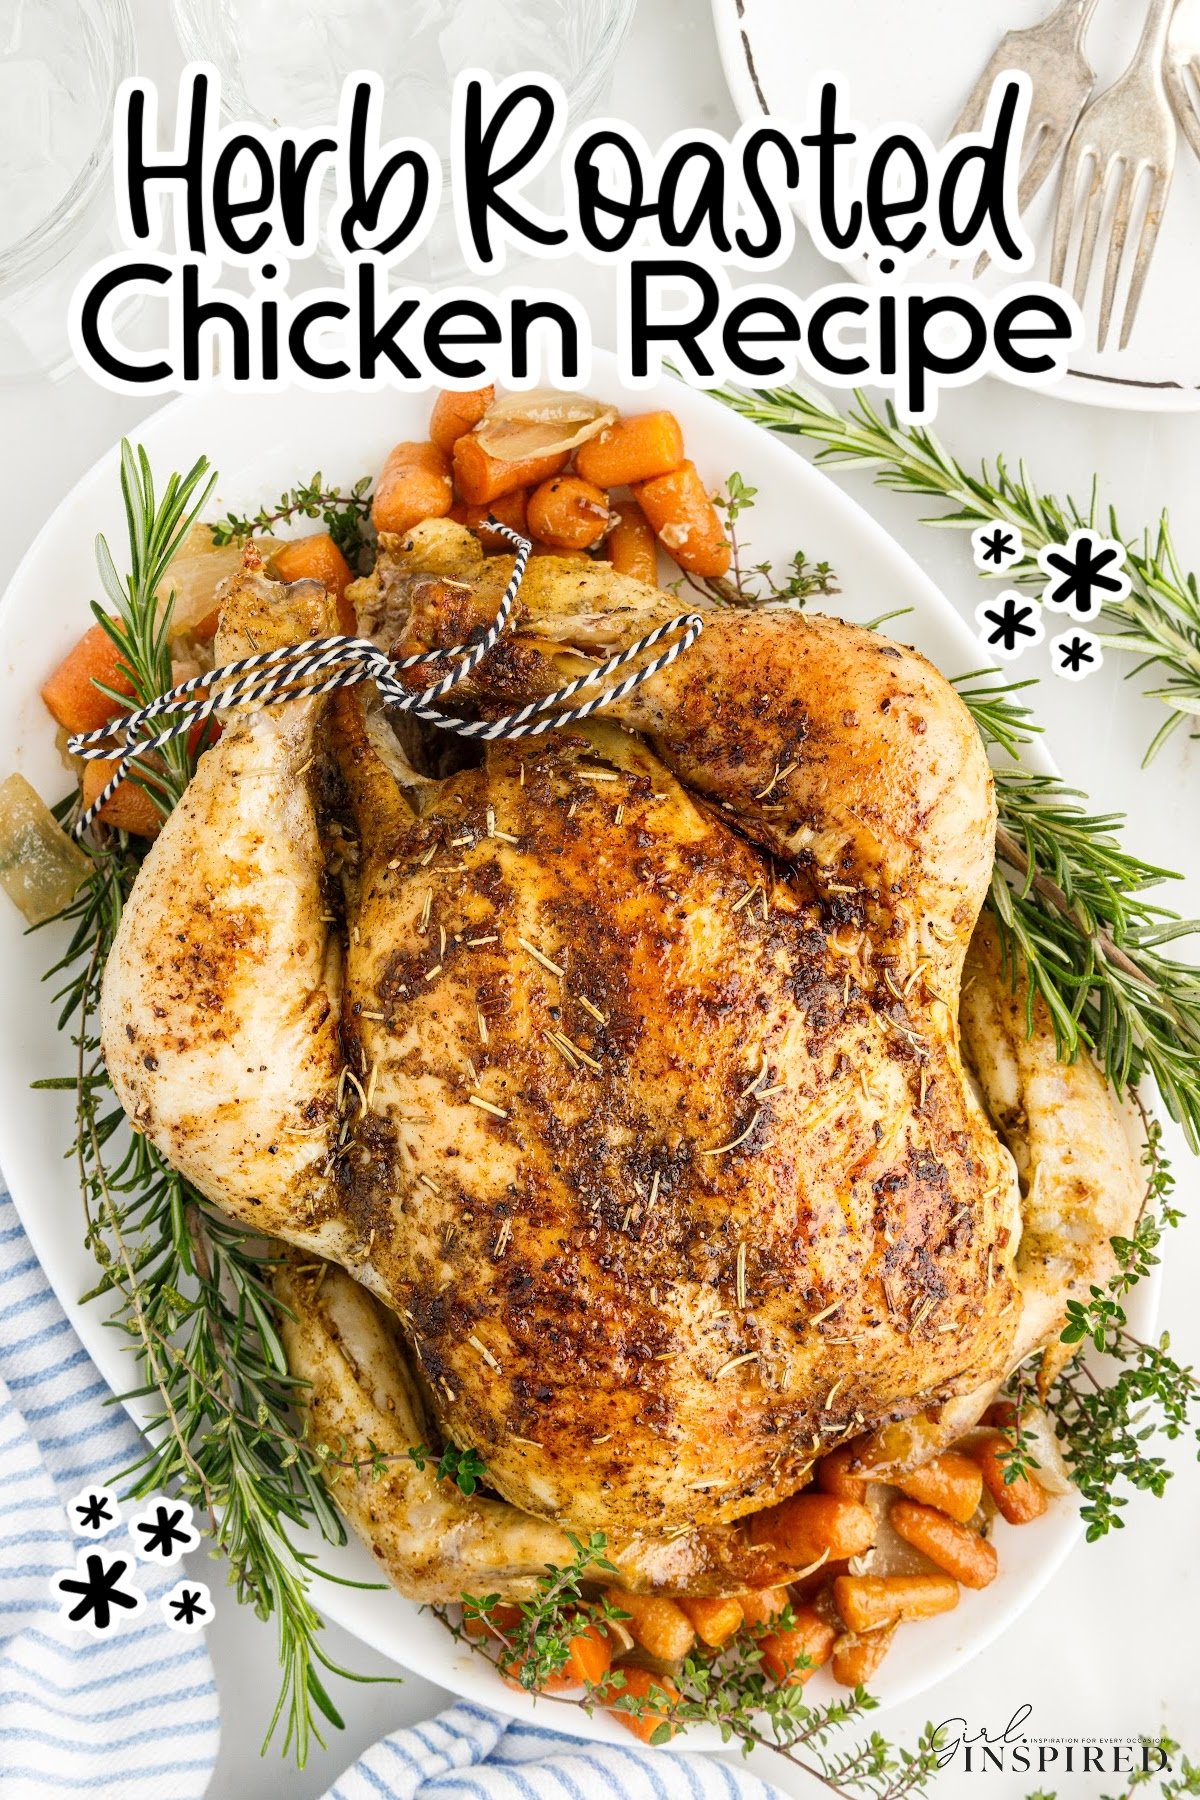 Whole herb roasted chicken on a serving tray with carrots, onions, and rosemary sprigs.